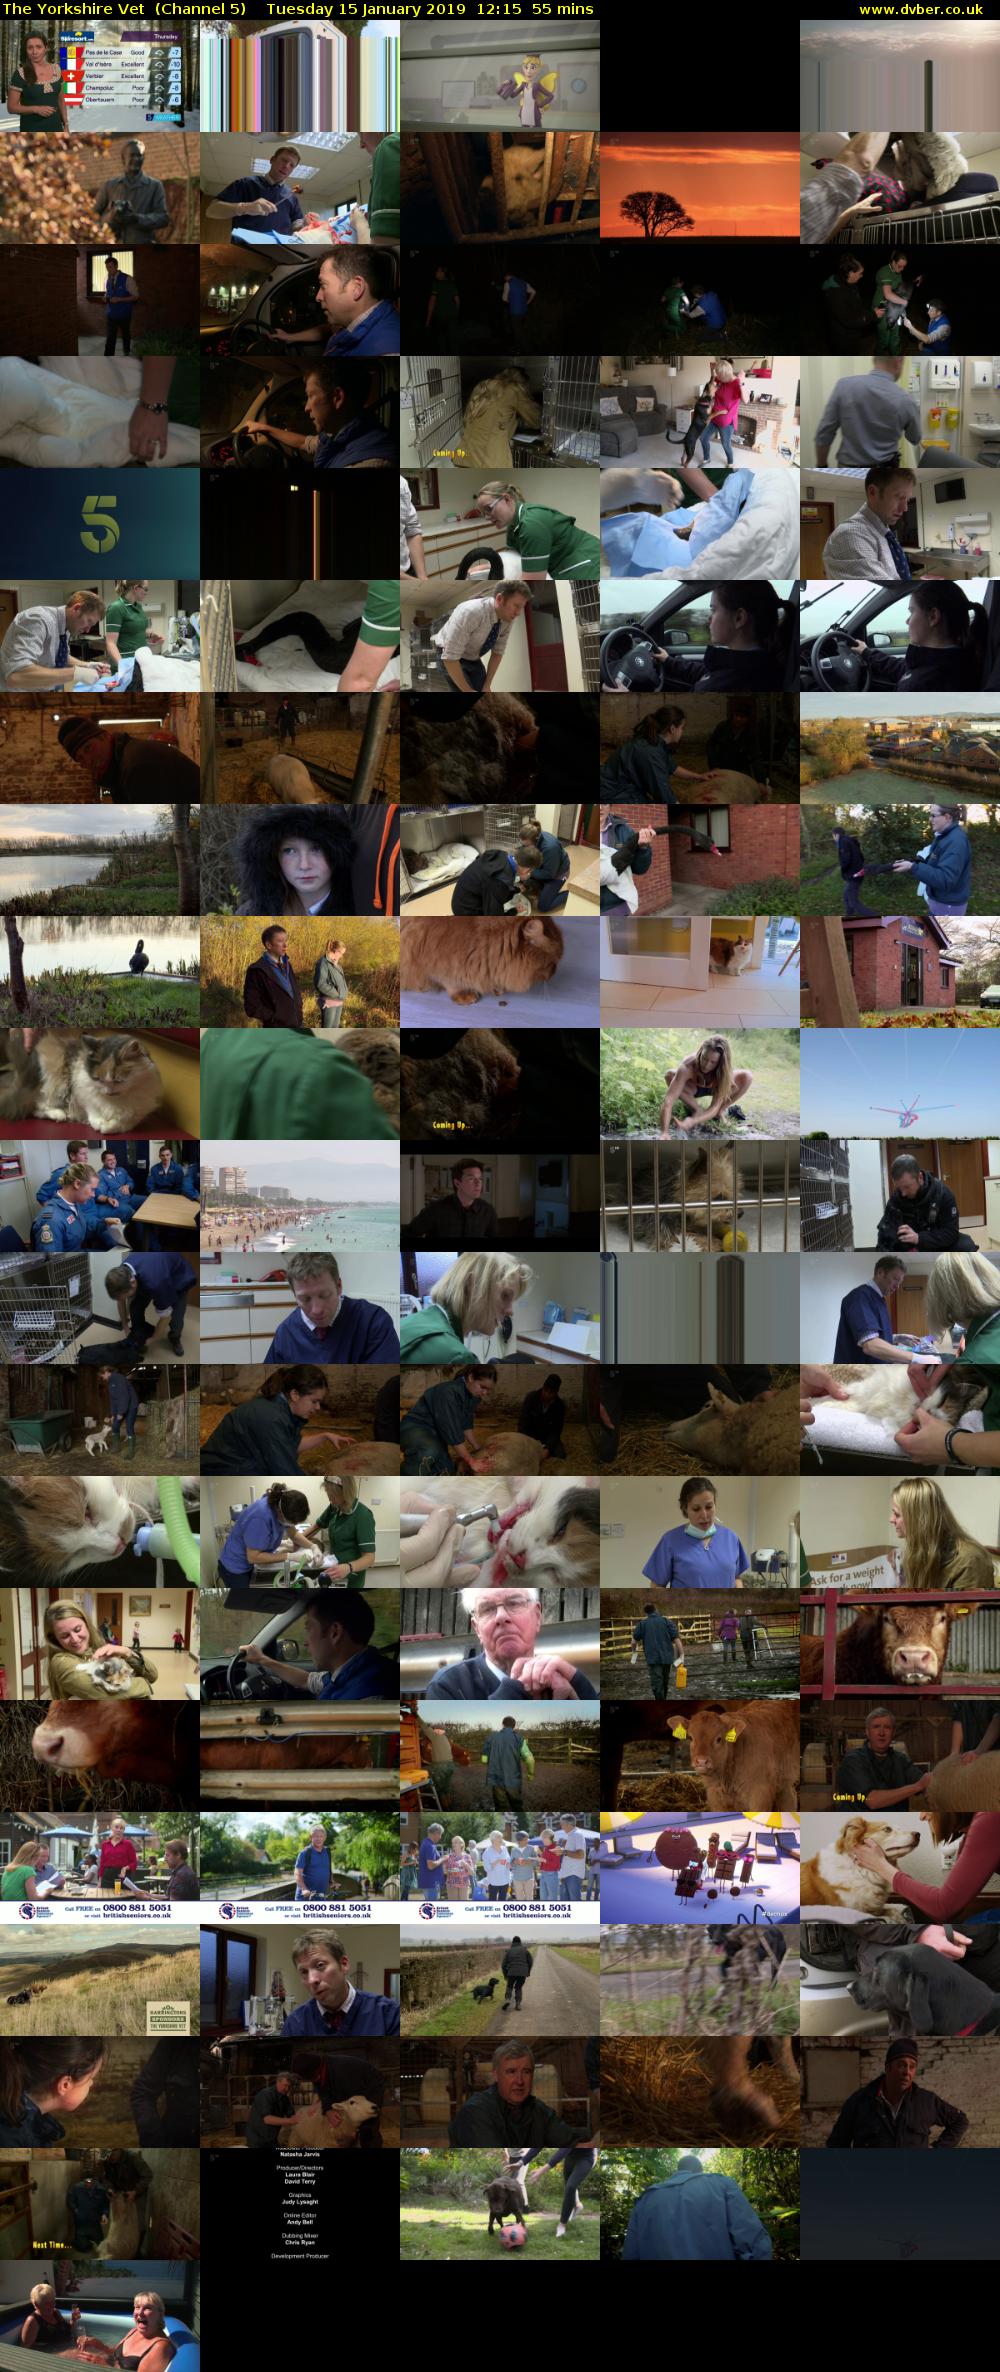 The Yorkshire Vet  (Channel 5) Tuesday 15 January 2019 12:15 - 13:10